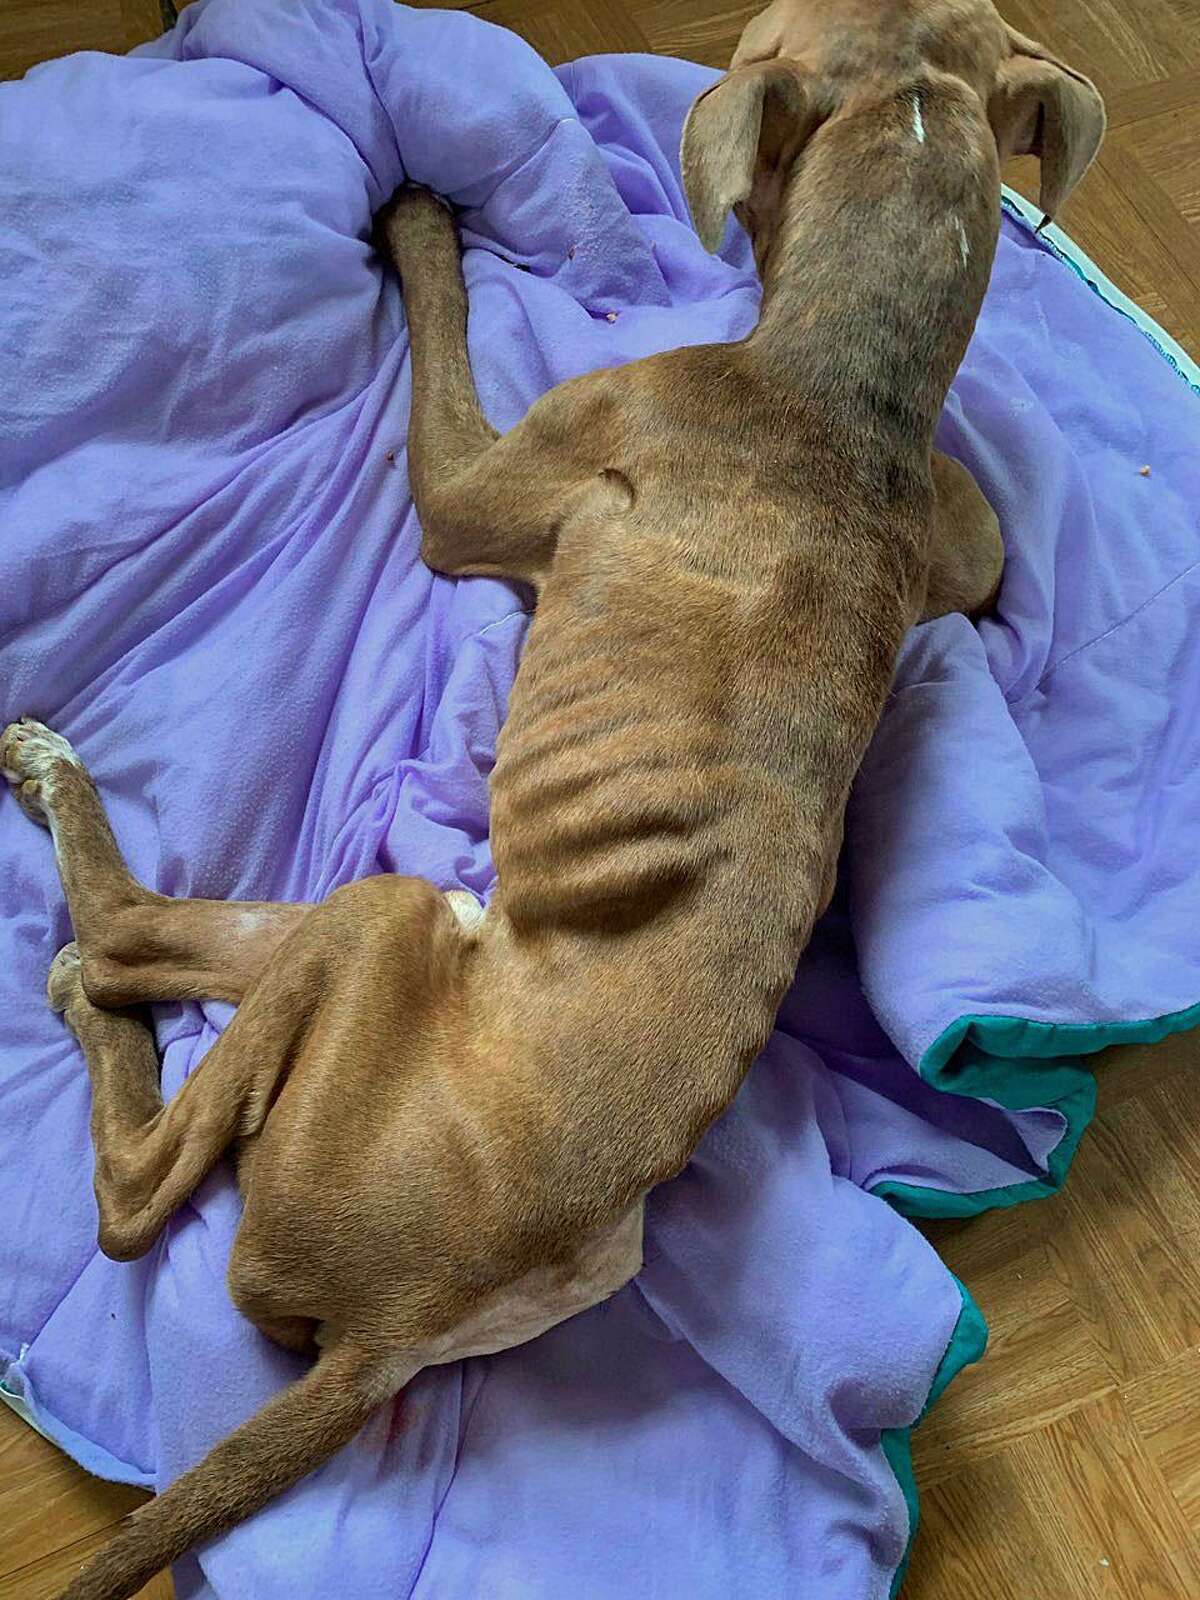 Monster, a dog that was under the care of Amr Wasfi, 74, of Derby, a vet at Black Rock Animal Hospital in Bridgeport. Police said Monster lost 17 pounds while at the facility, and that Wasfi performed an unnecessary medical procedure on the dog.